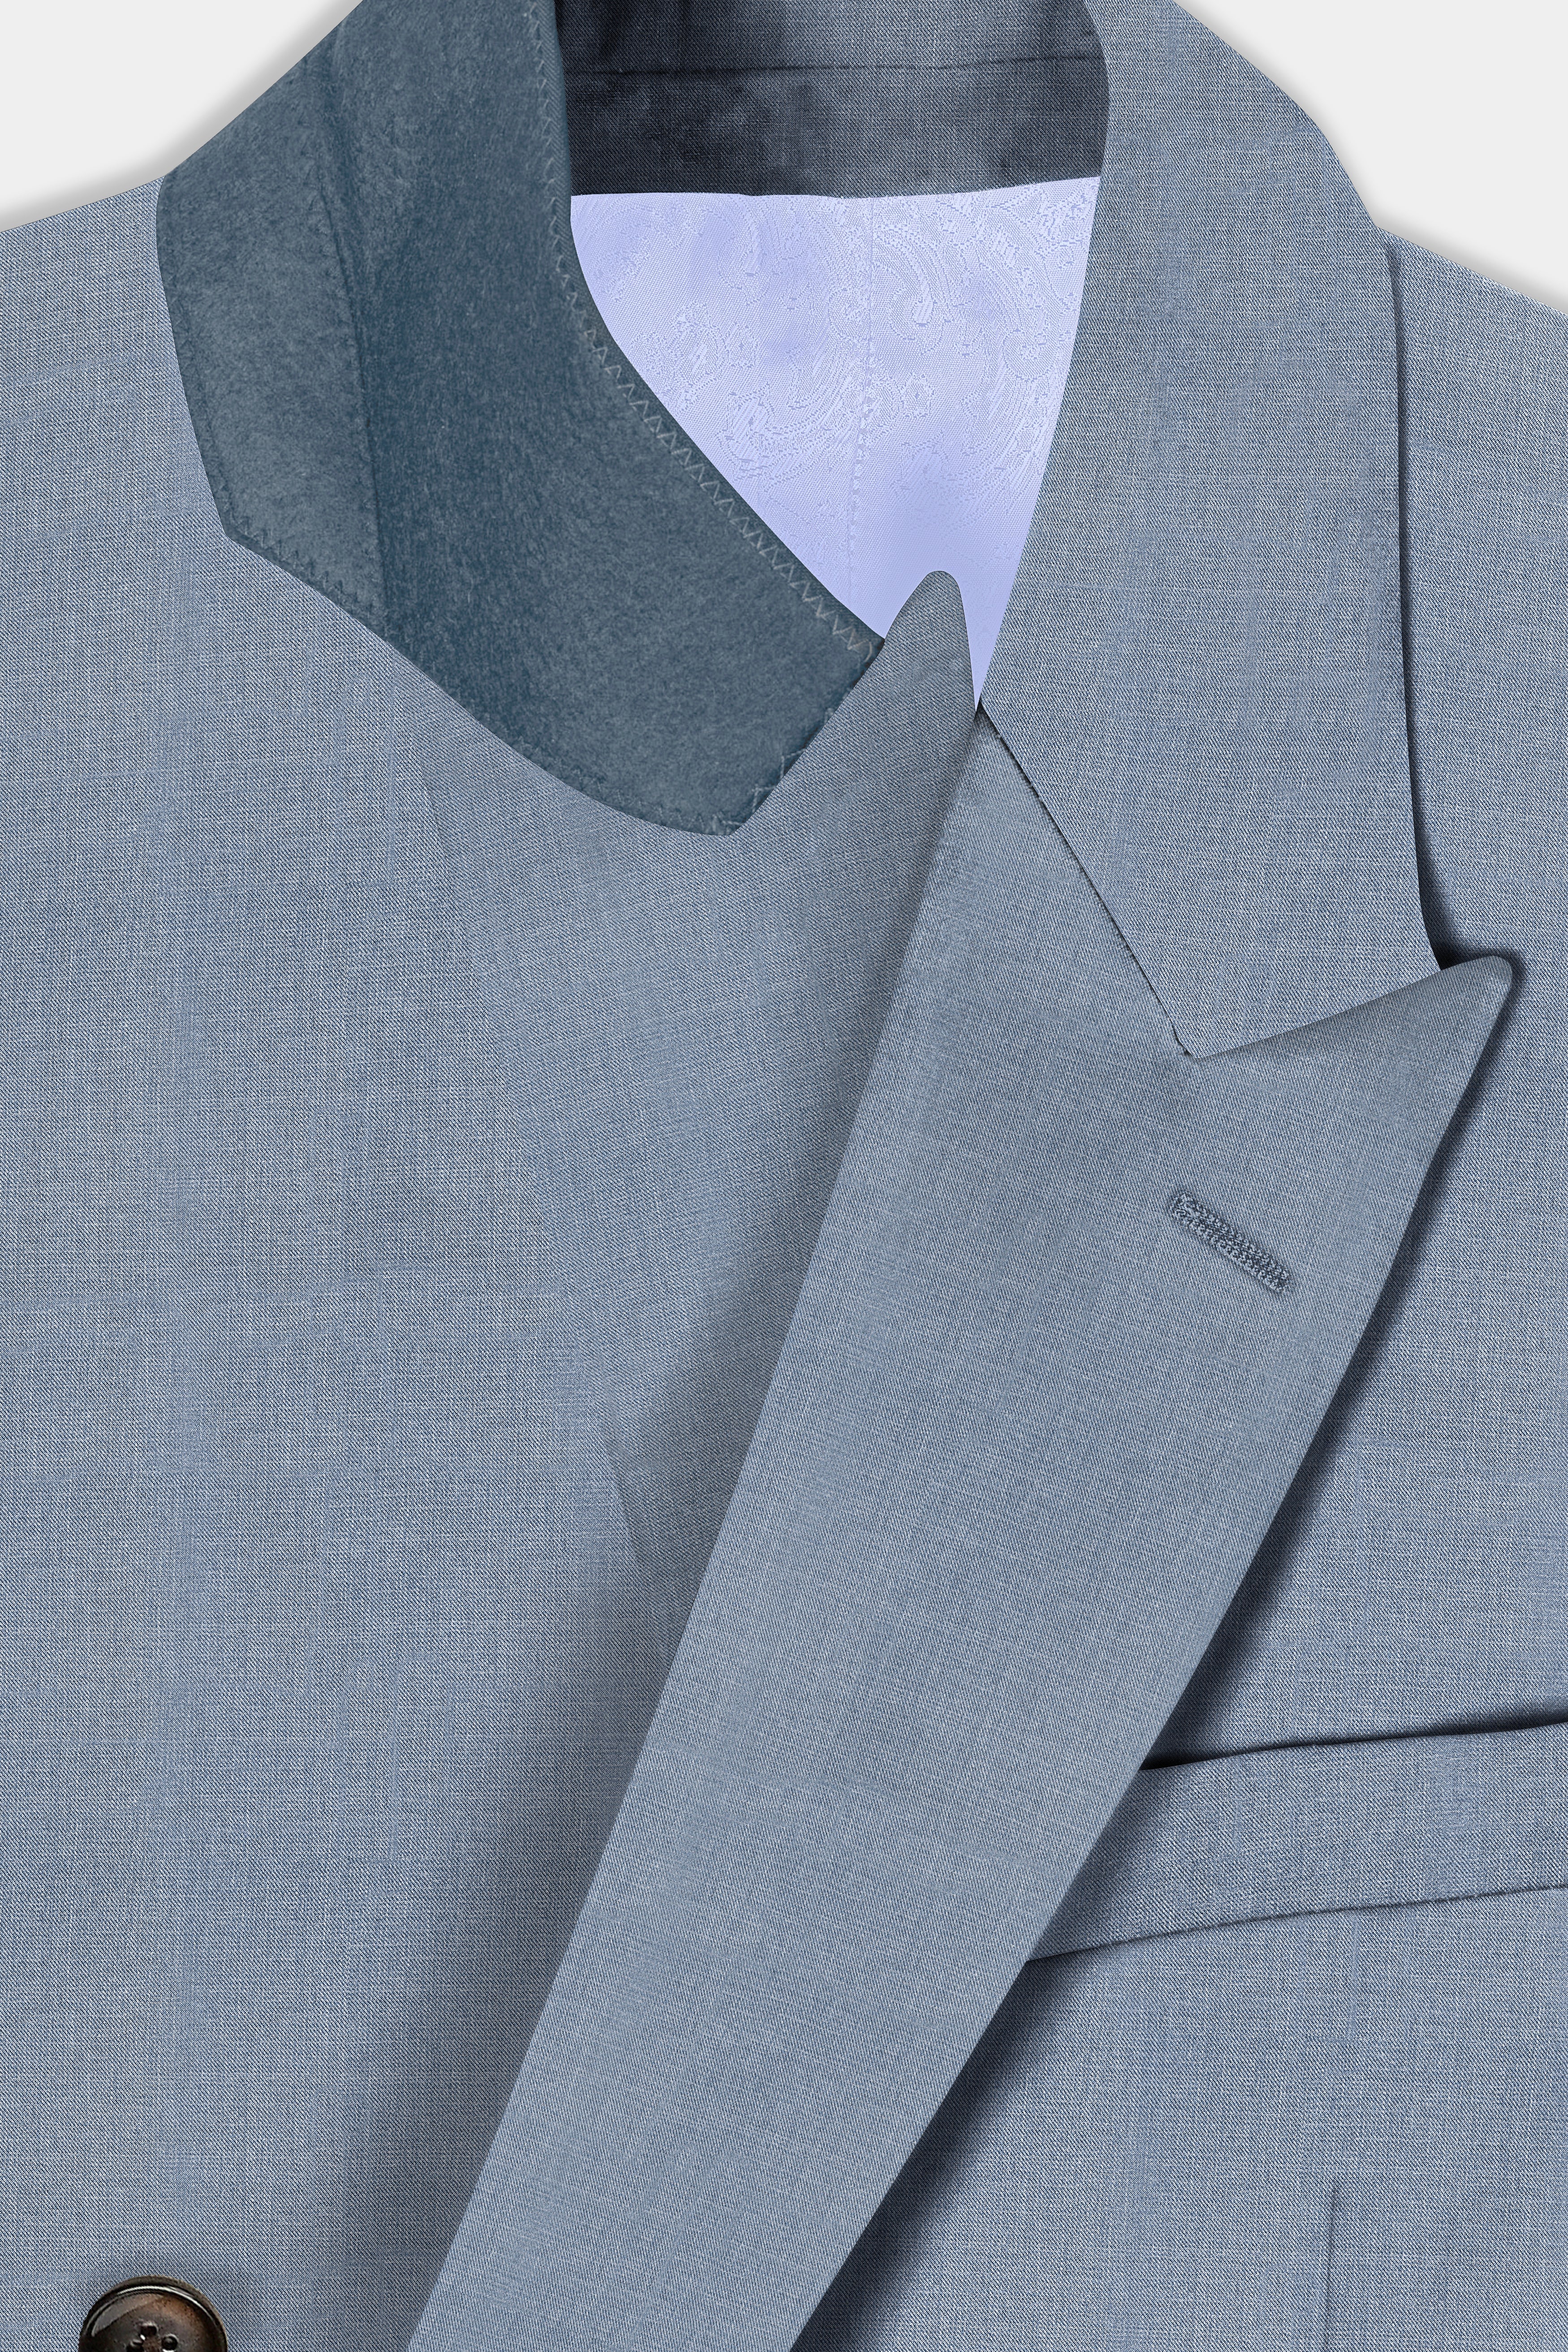 Bluish Wool Rich Double Breasted Suit